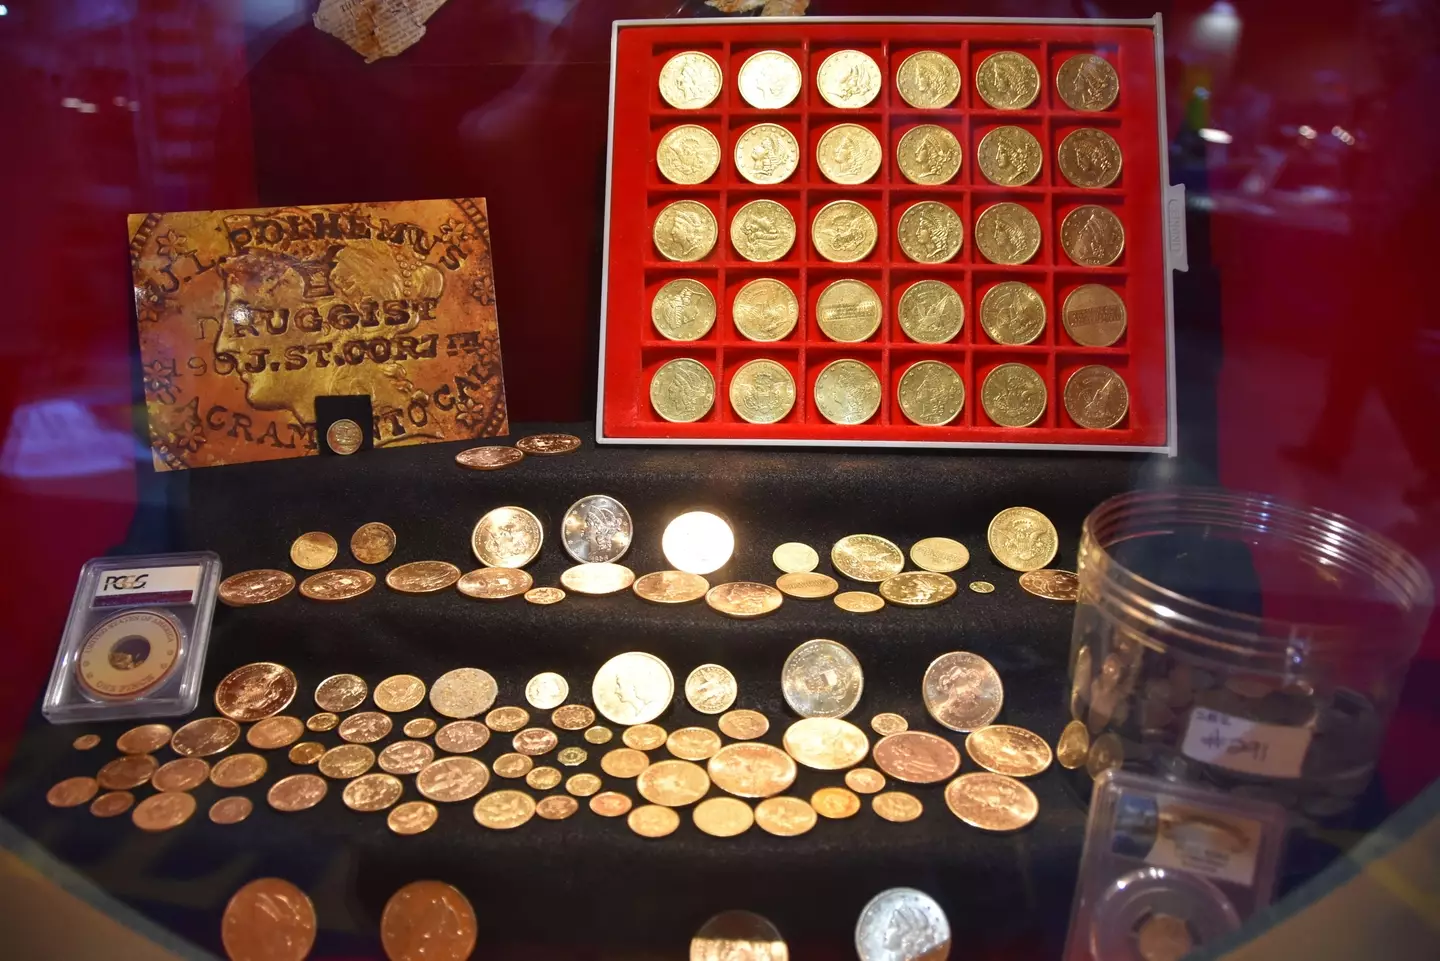 Some gold coins found in the wreckage.